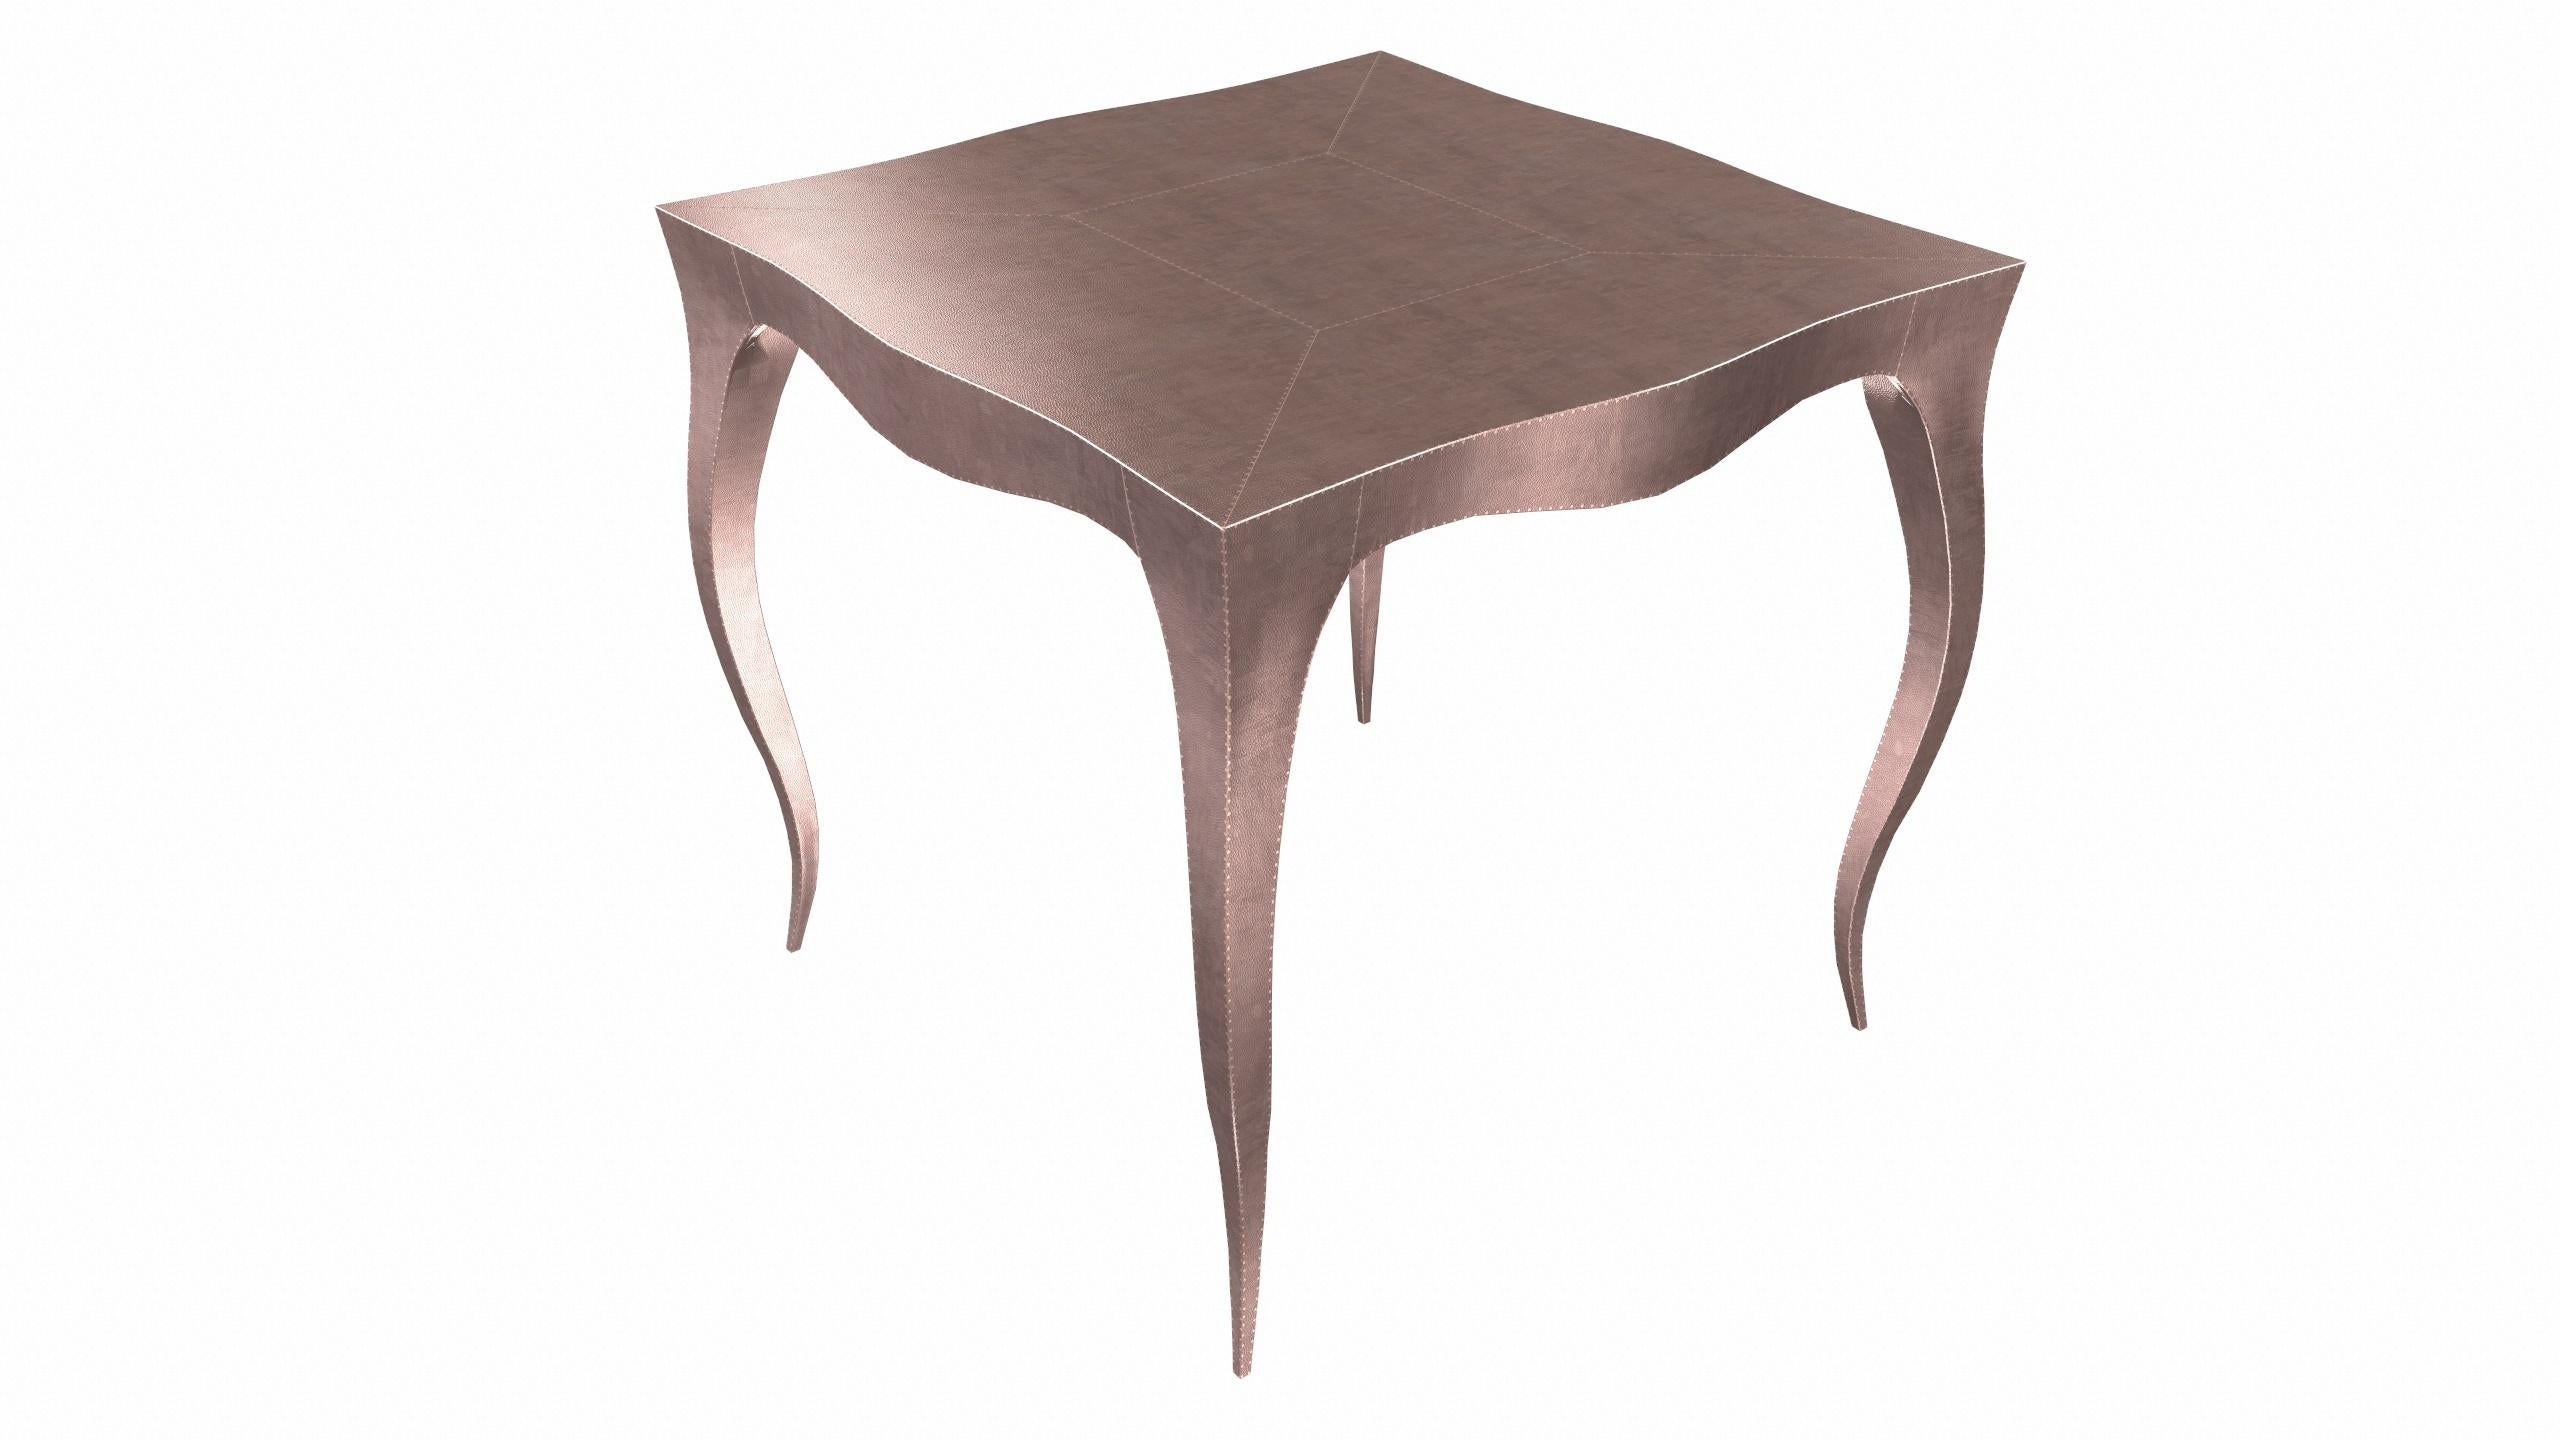 Contemporary Louise Art Nouveau Vanities Tables Mid. Hammered Copper by Paul Mathieu For Sale